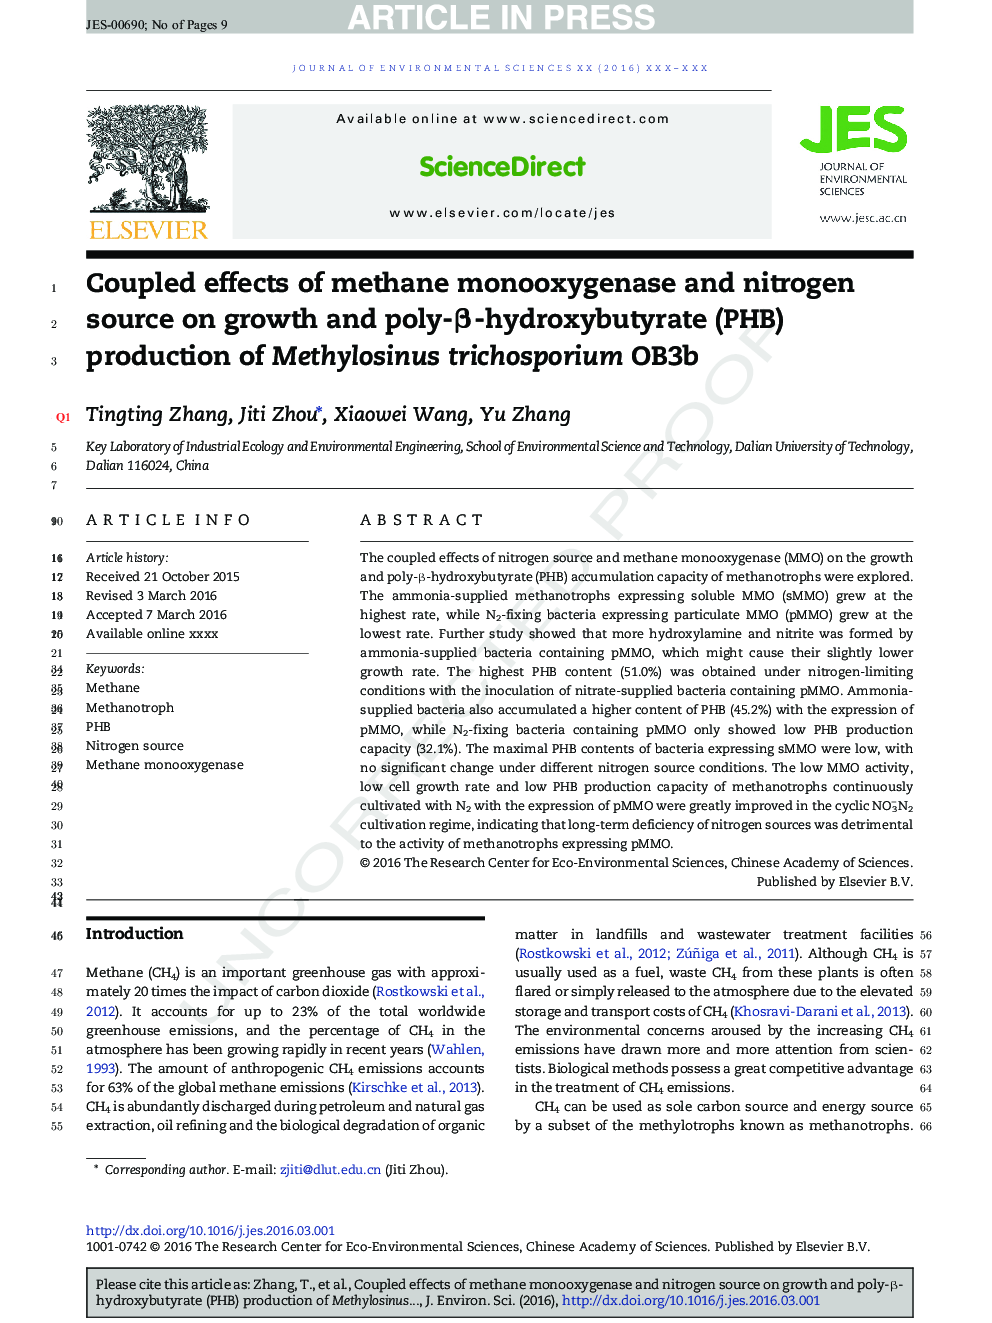 Coupled effects of methane monooxygenase and nitrogen source on growth and poly-Î²-hydroxybutyrate (PHB) production of Methylosinus trichosporium OB3b